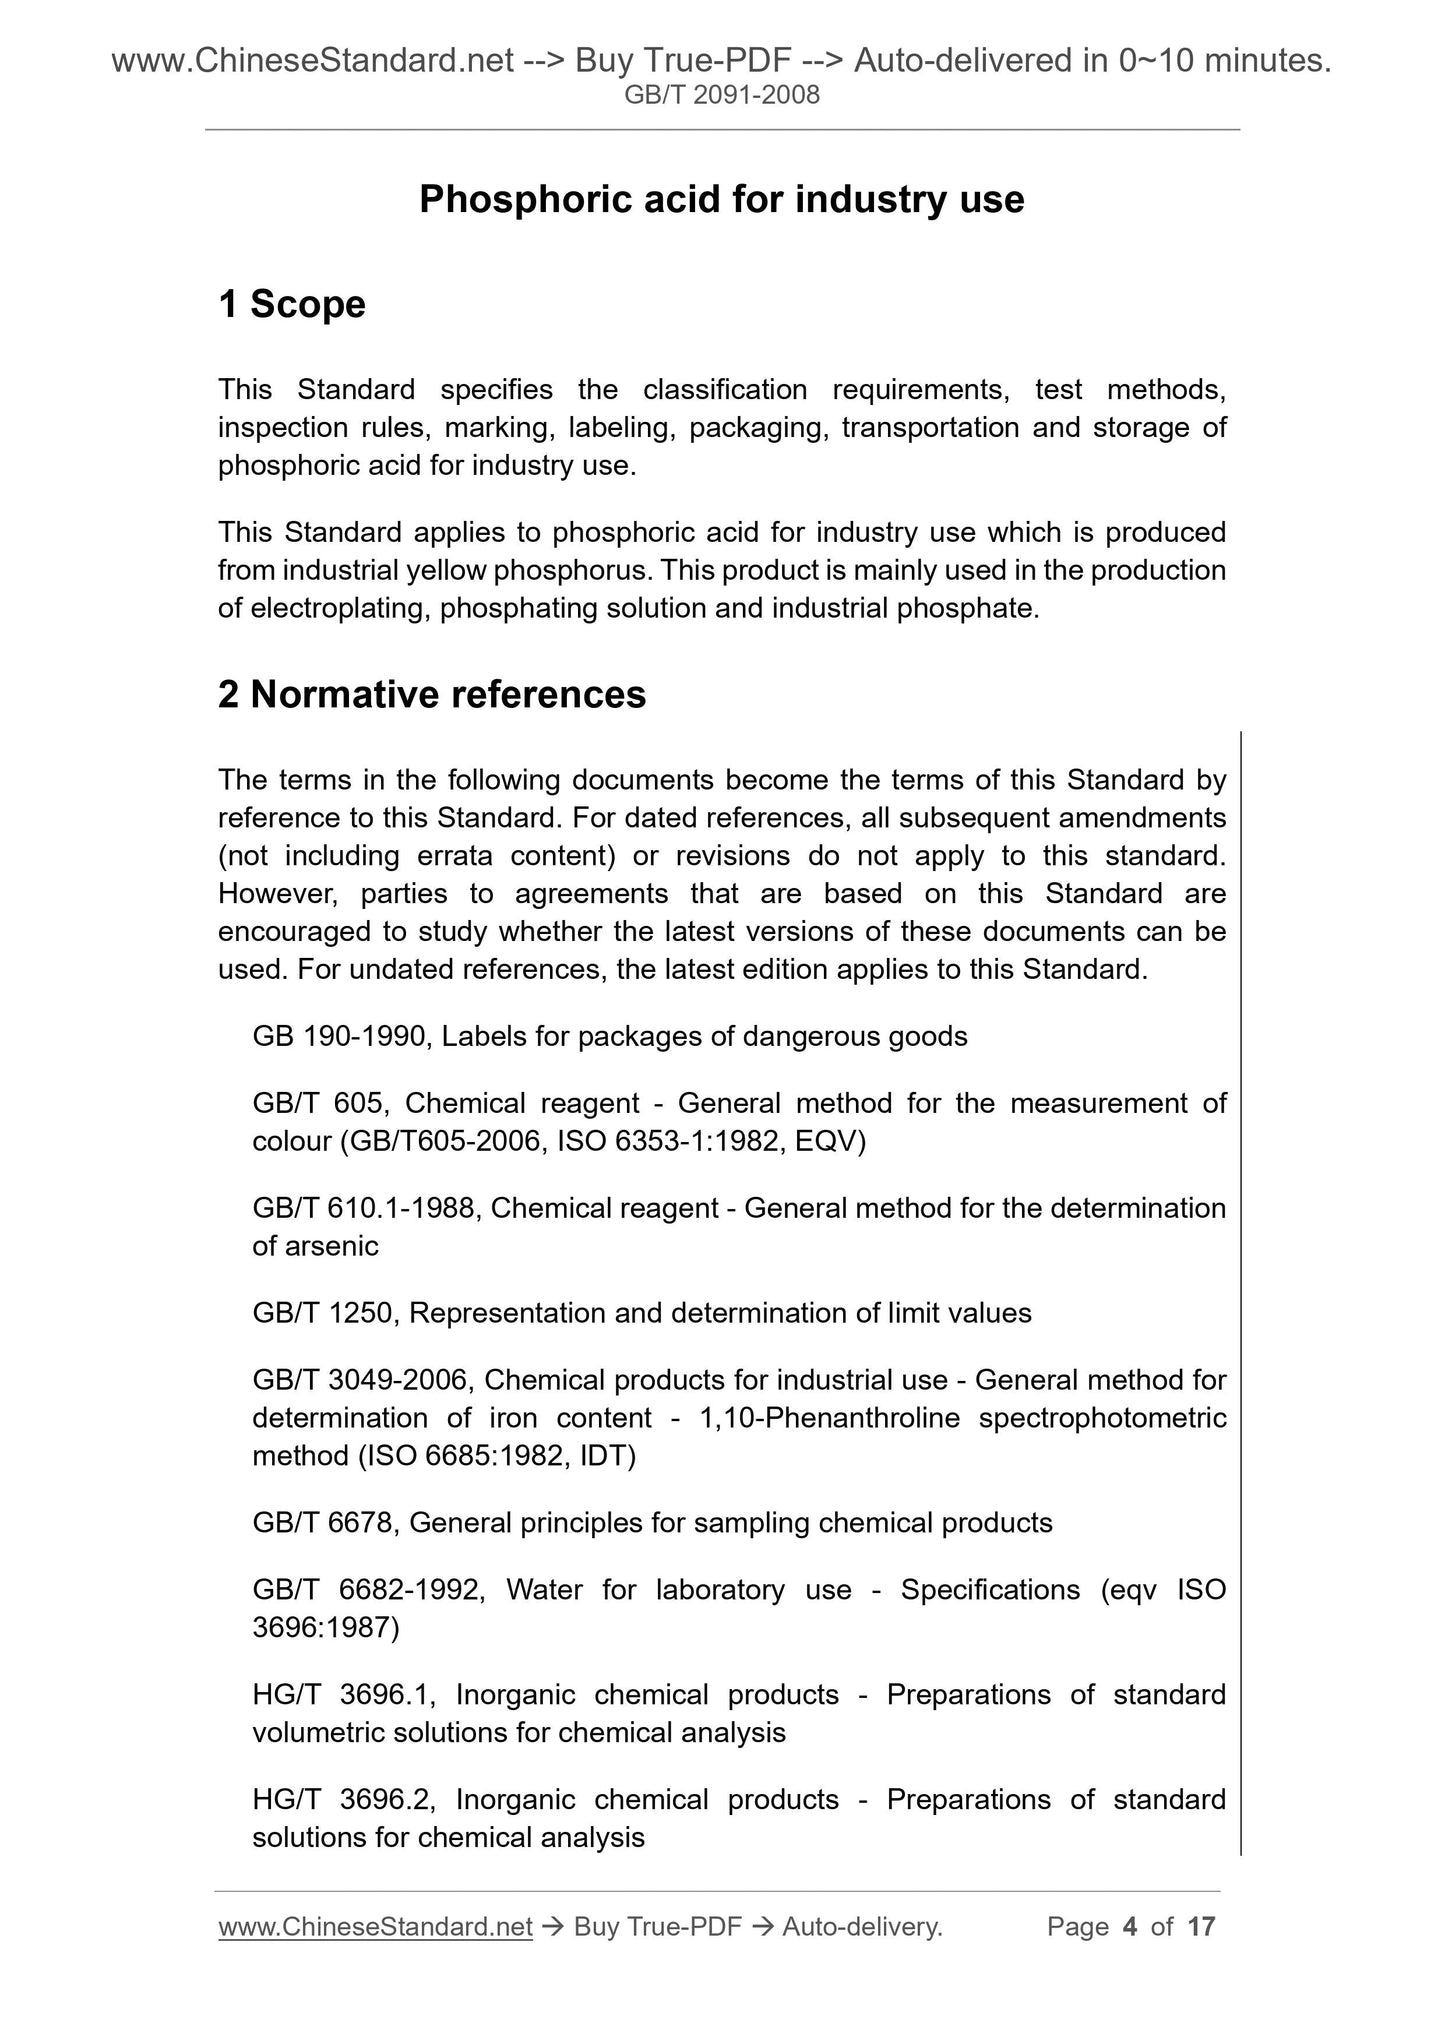 GB/T 2091-2008 Page 4